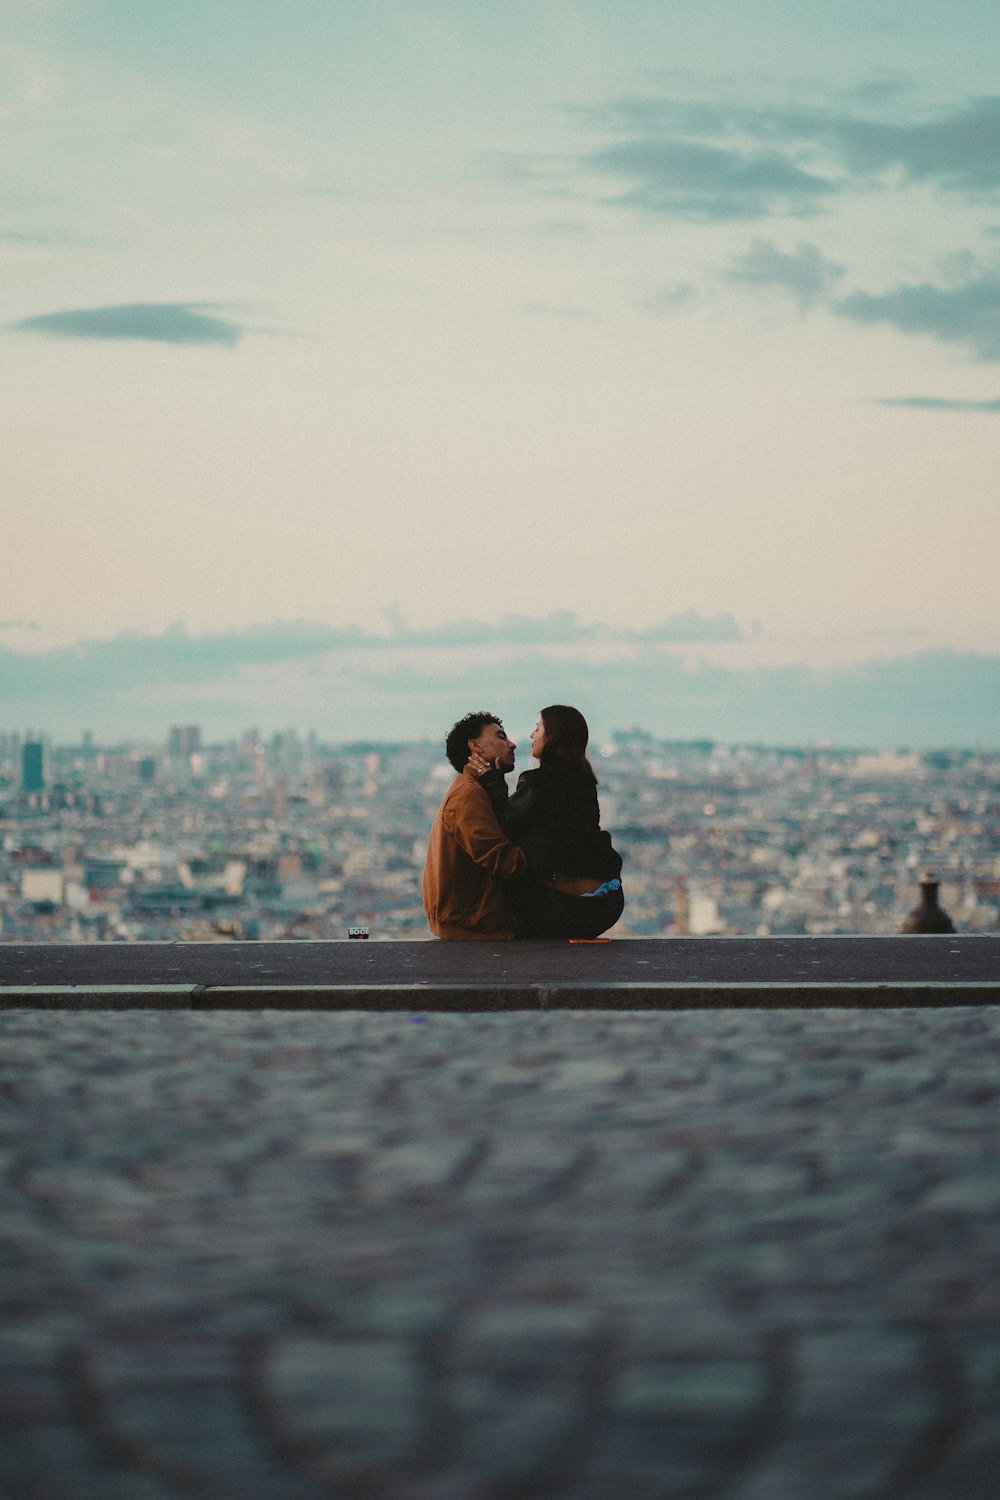 a man and woman sitting on a ledge overlooking a city